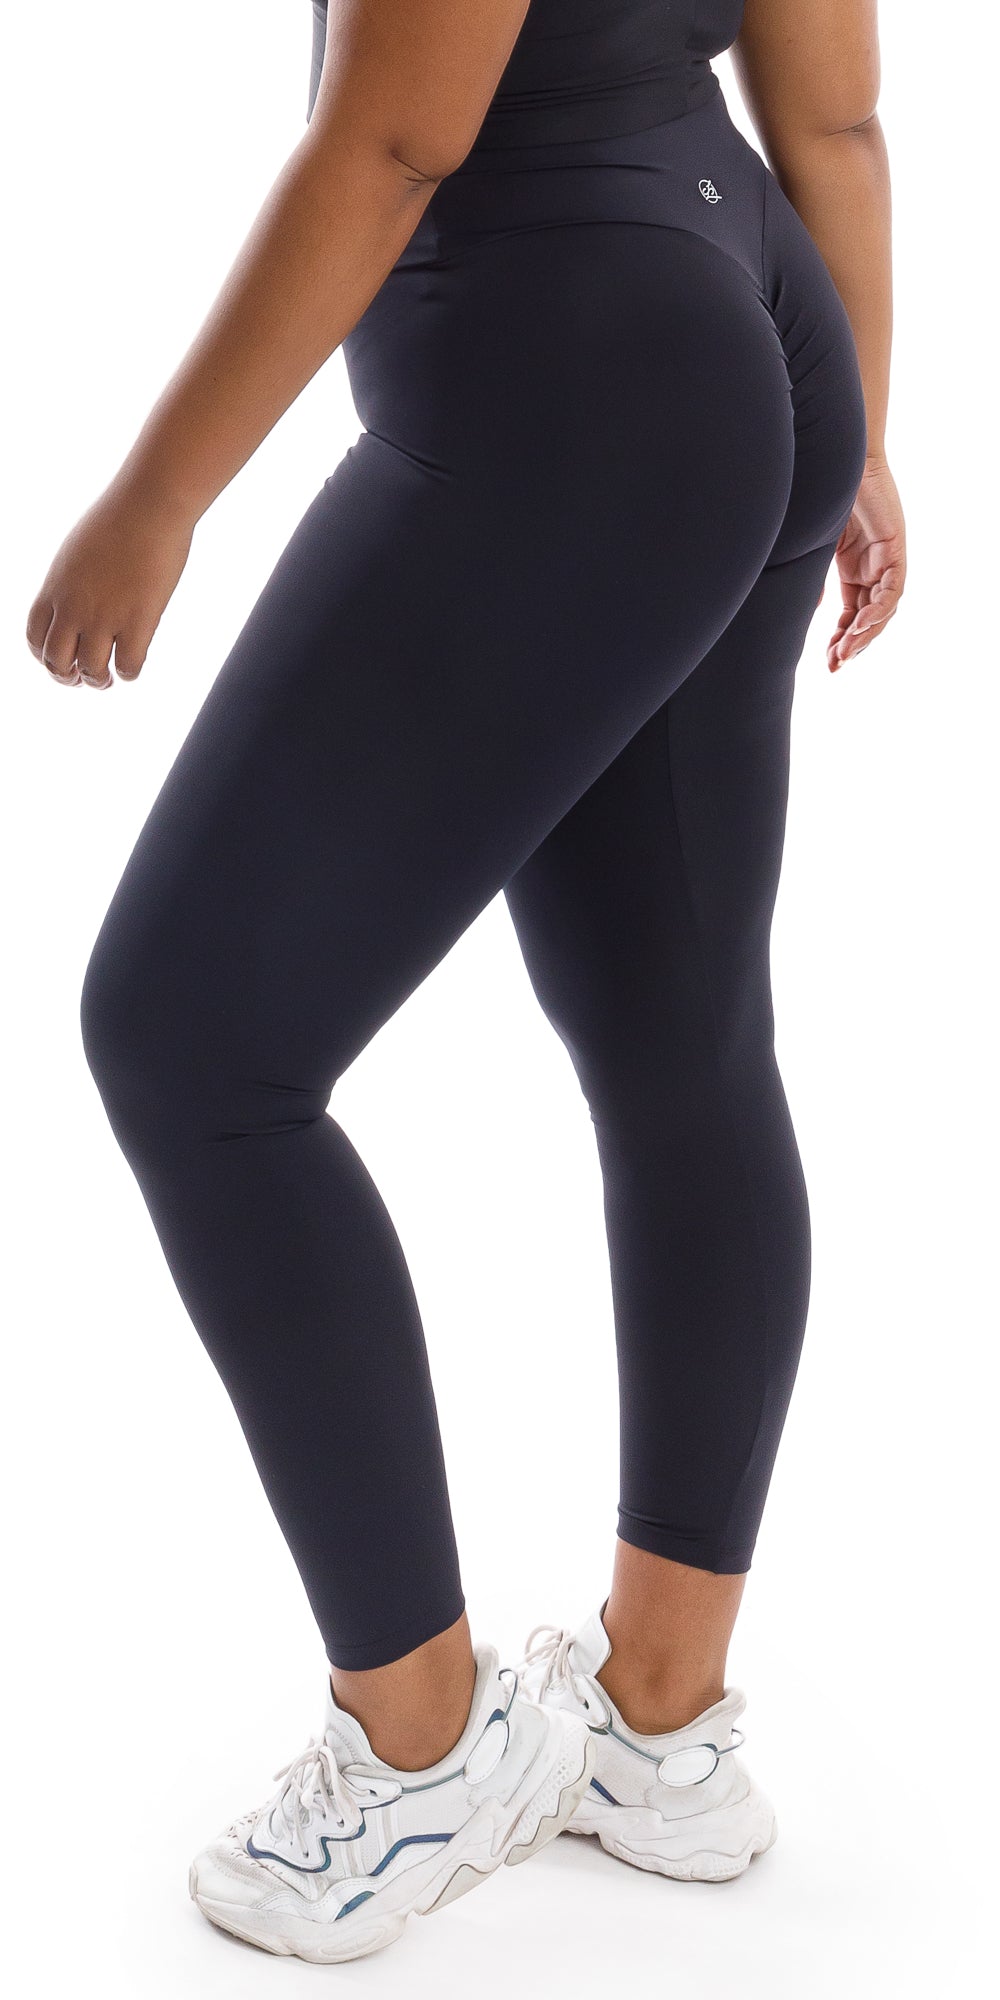 Women's High Waist Ruched Yoga Pants Tummy Control Textured Butt Lifting  Workout Leggings Stretchy Booty Scrunch Tights (Green, Small) - Walmart.com